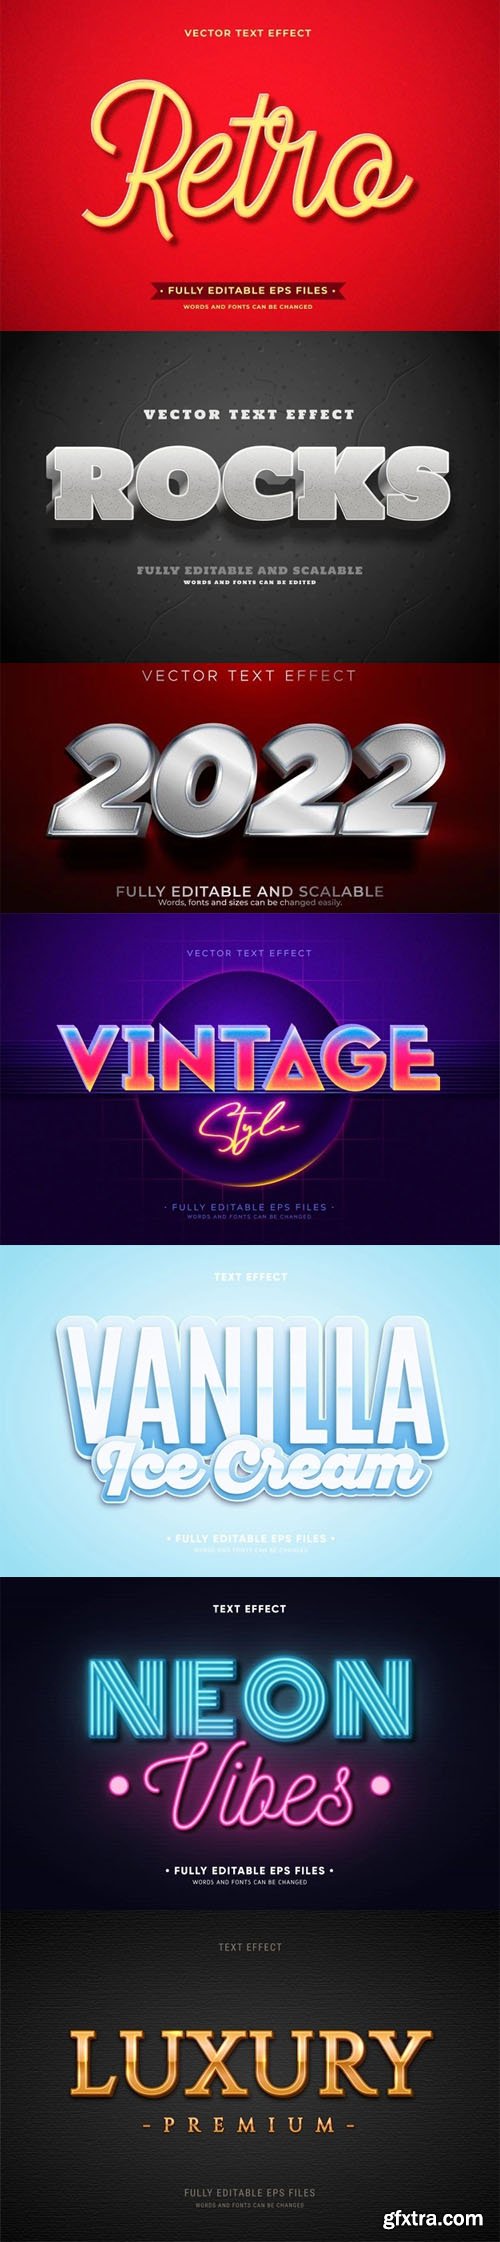 Realistic & Creative Text Effects Collection Vol.2 - 10+ Vector Templates